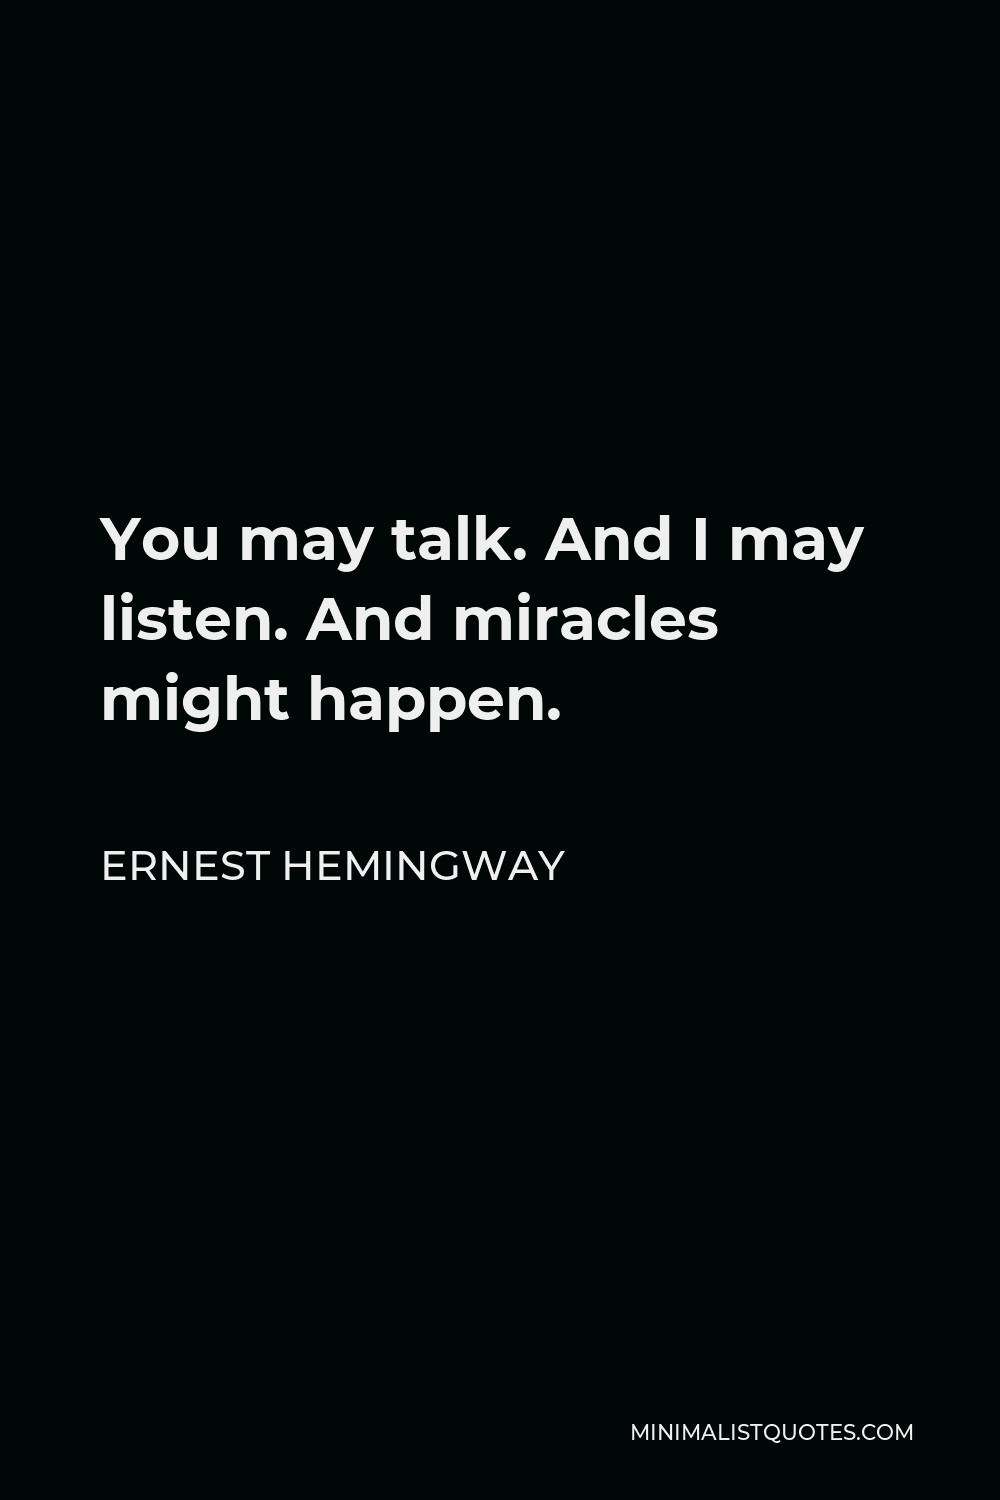 Ernest Hemingway Quote - You may talk. And I may listen. And miracles might happen.